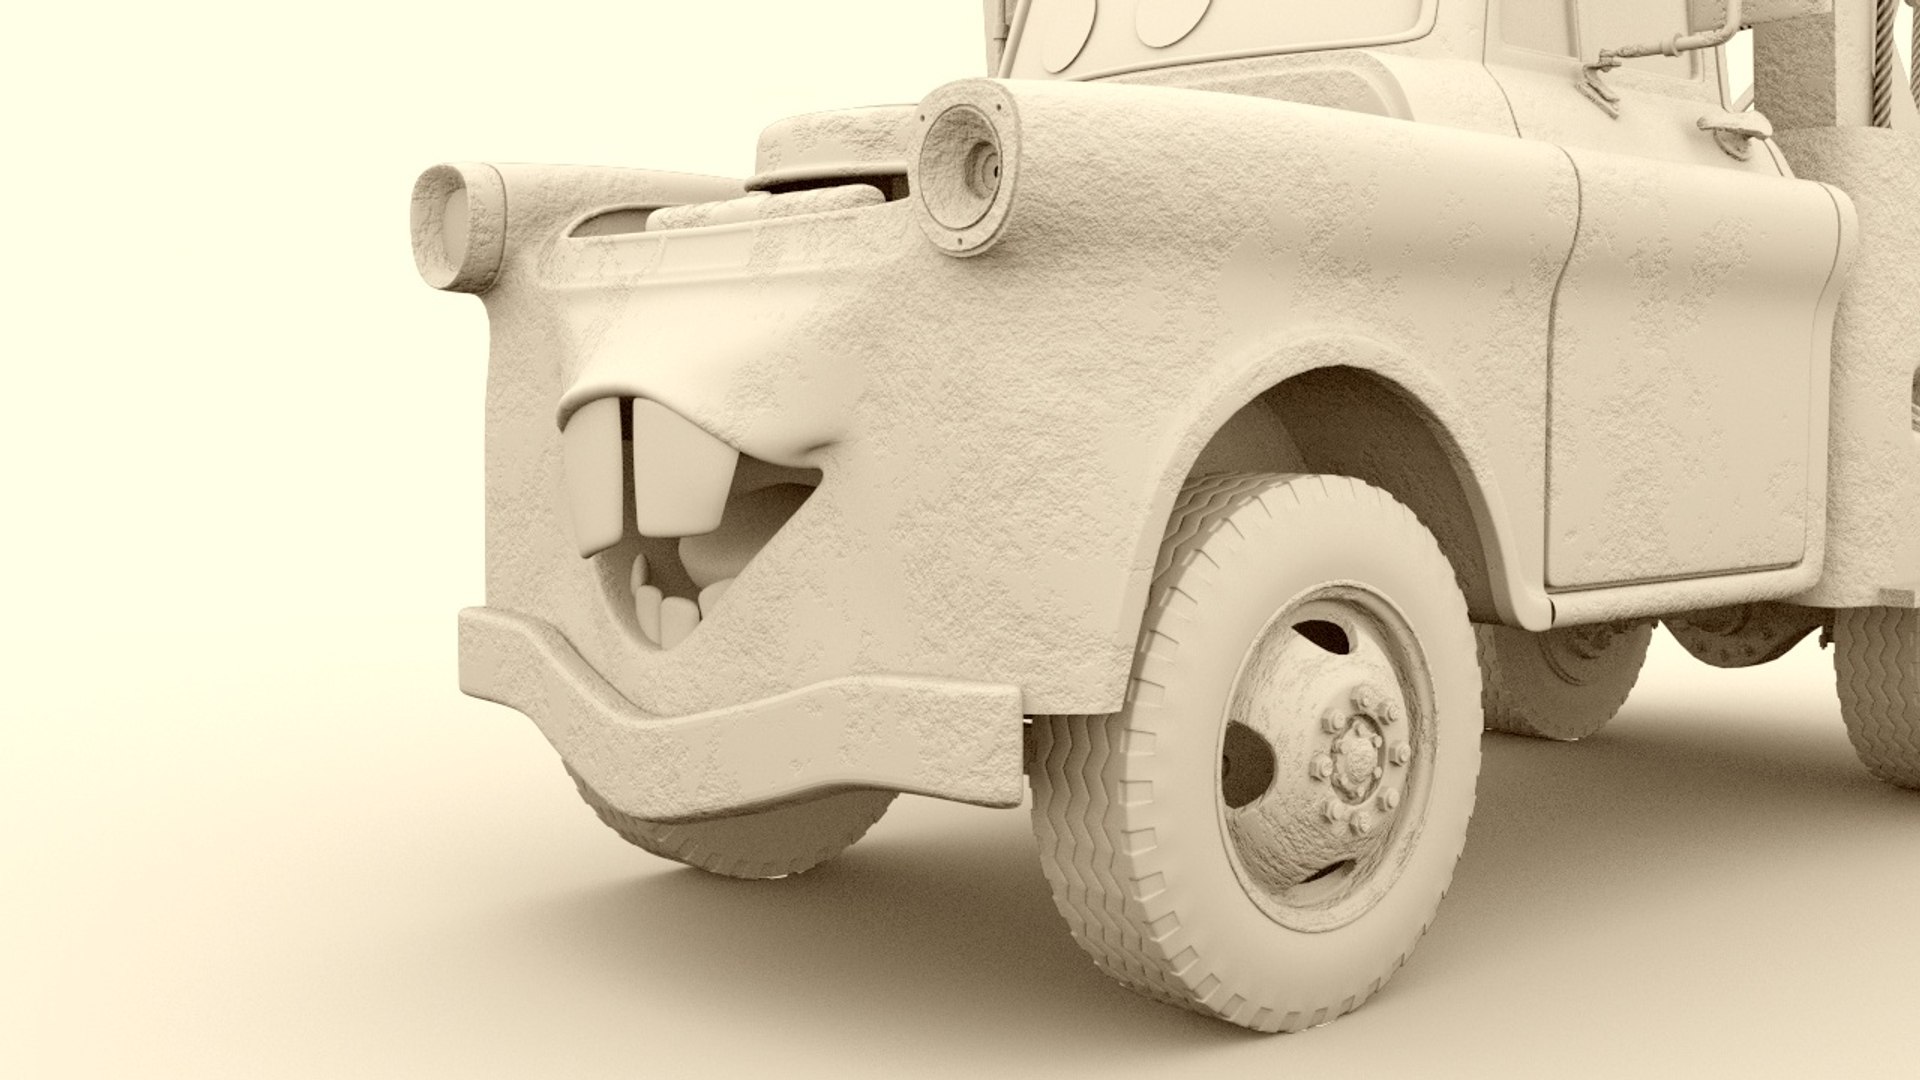 Pixar Cars Tow Mater - 3D Model by AlphaGroup